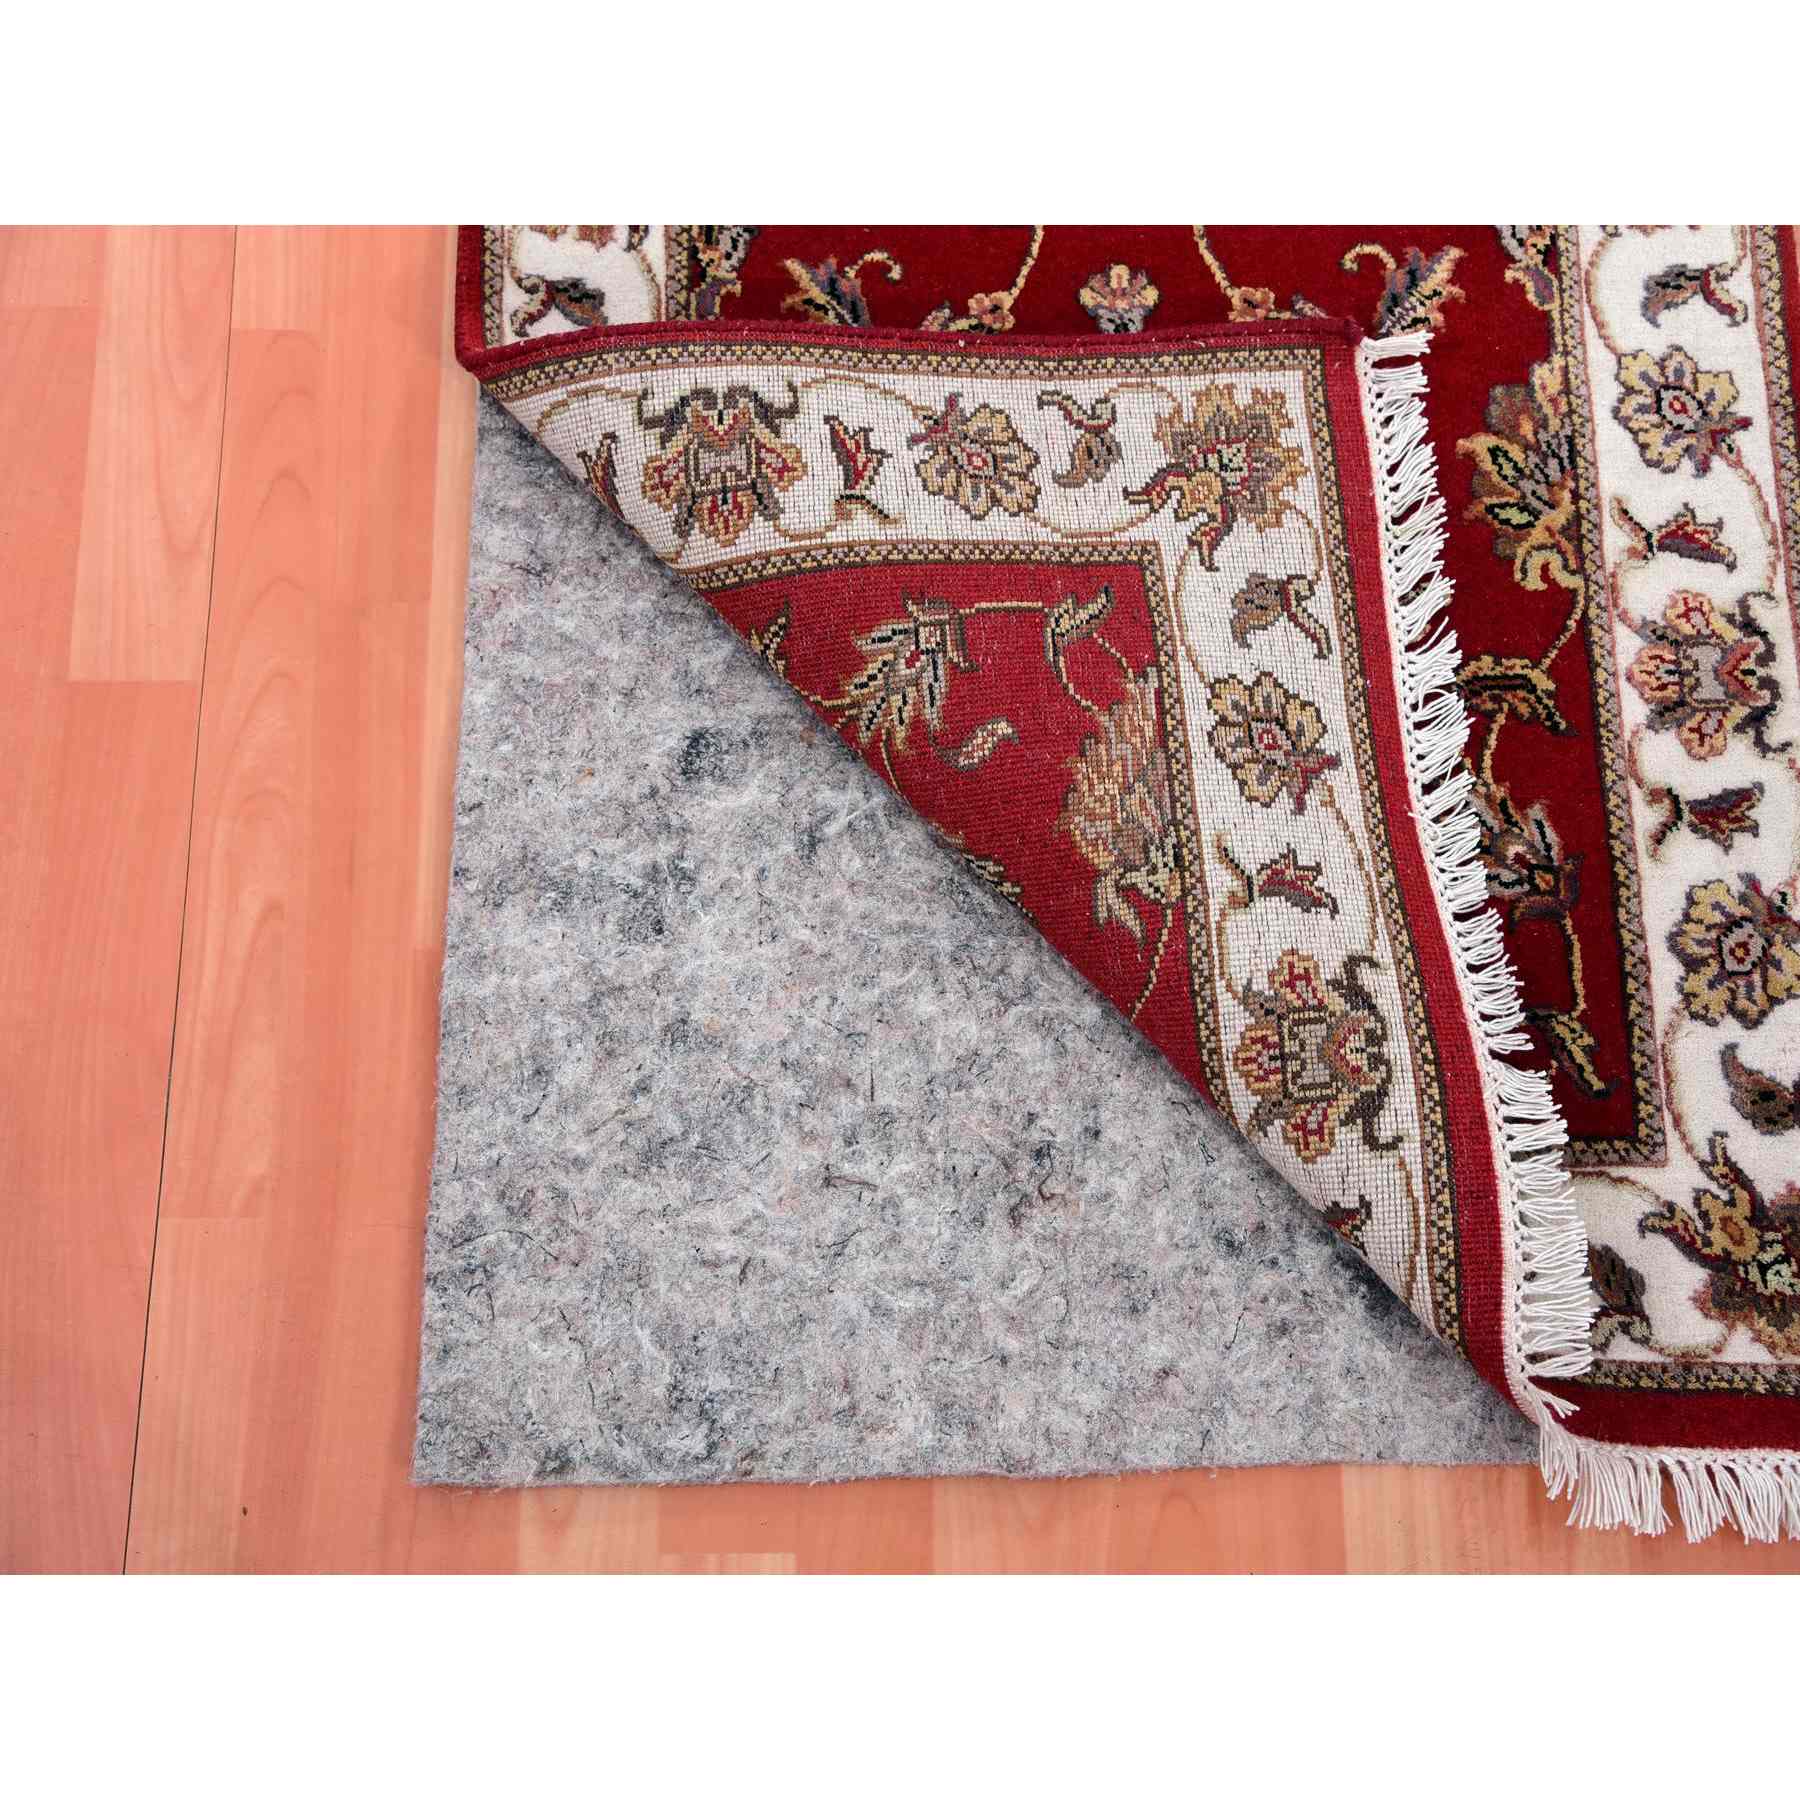 Rajasthan-Hand-Knotted-Rug-376965